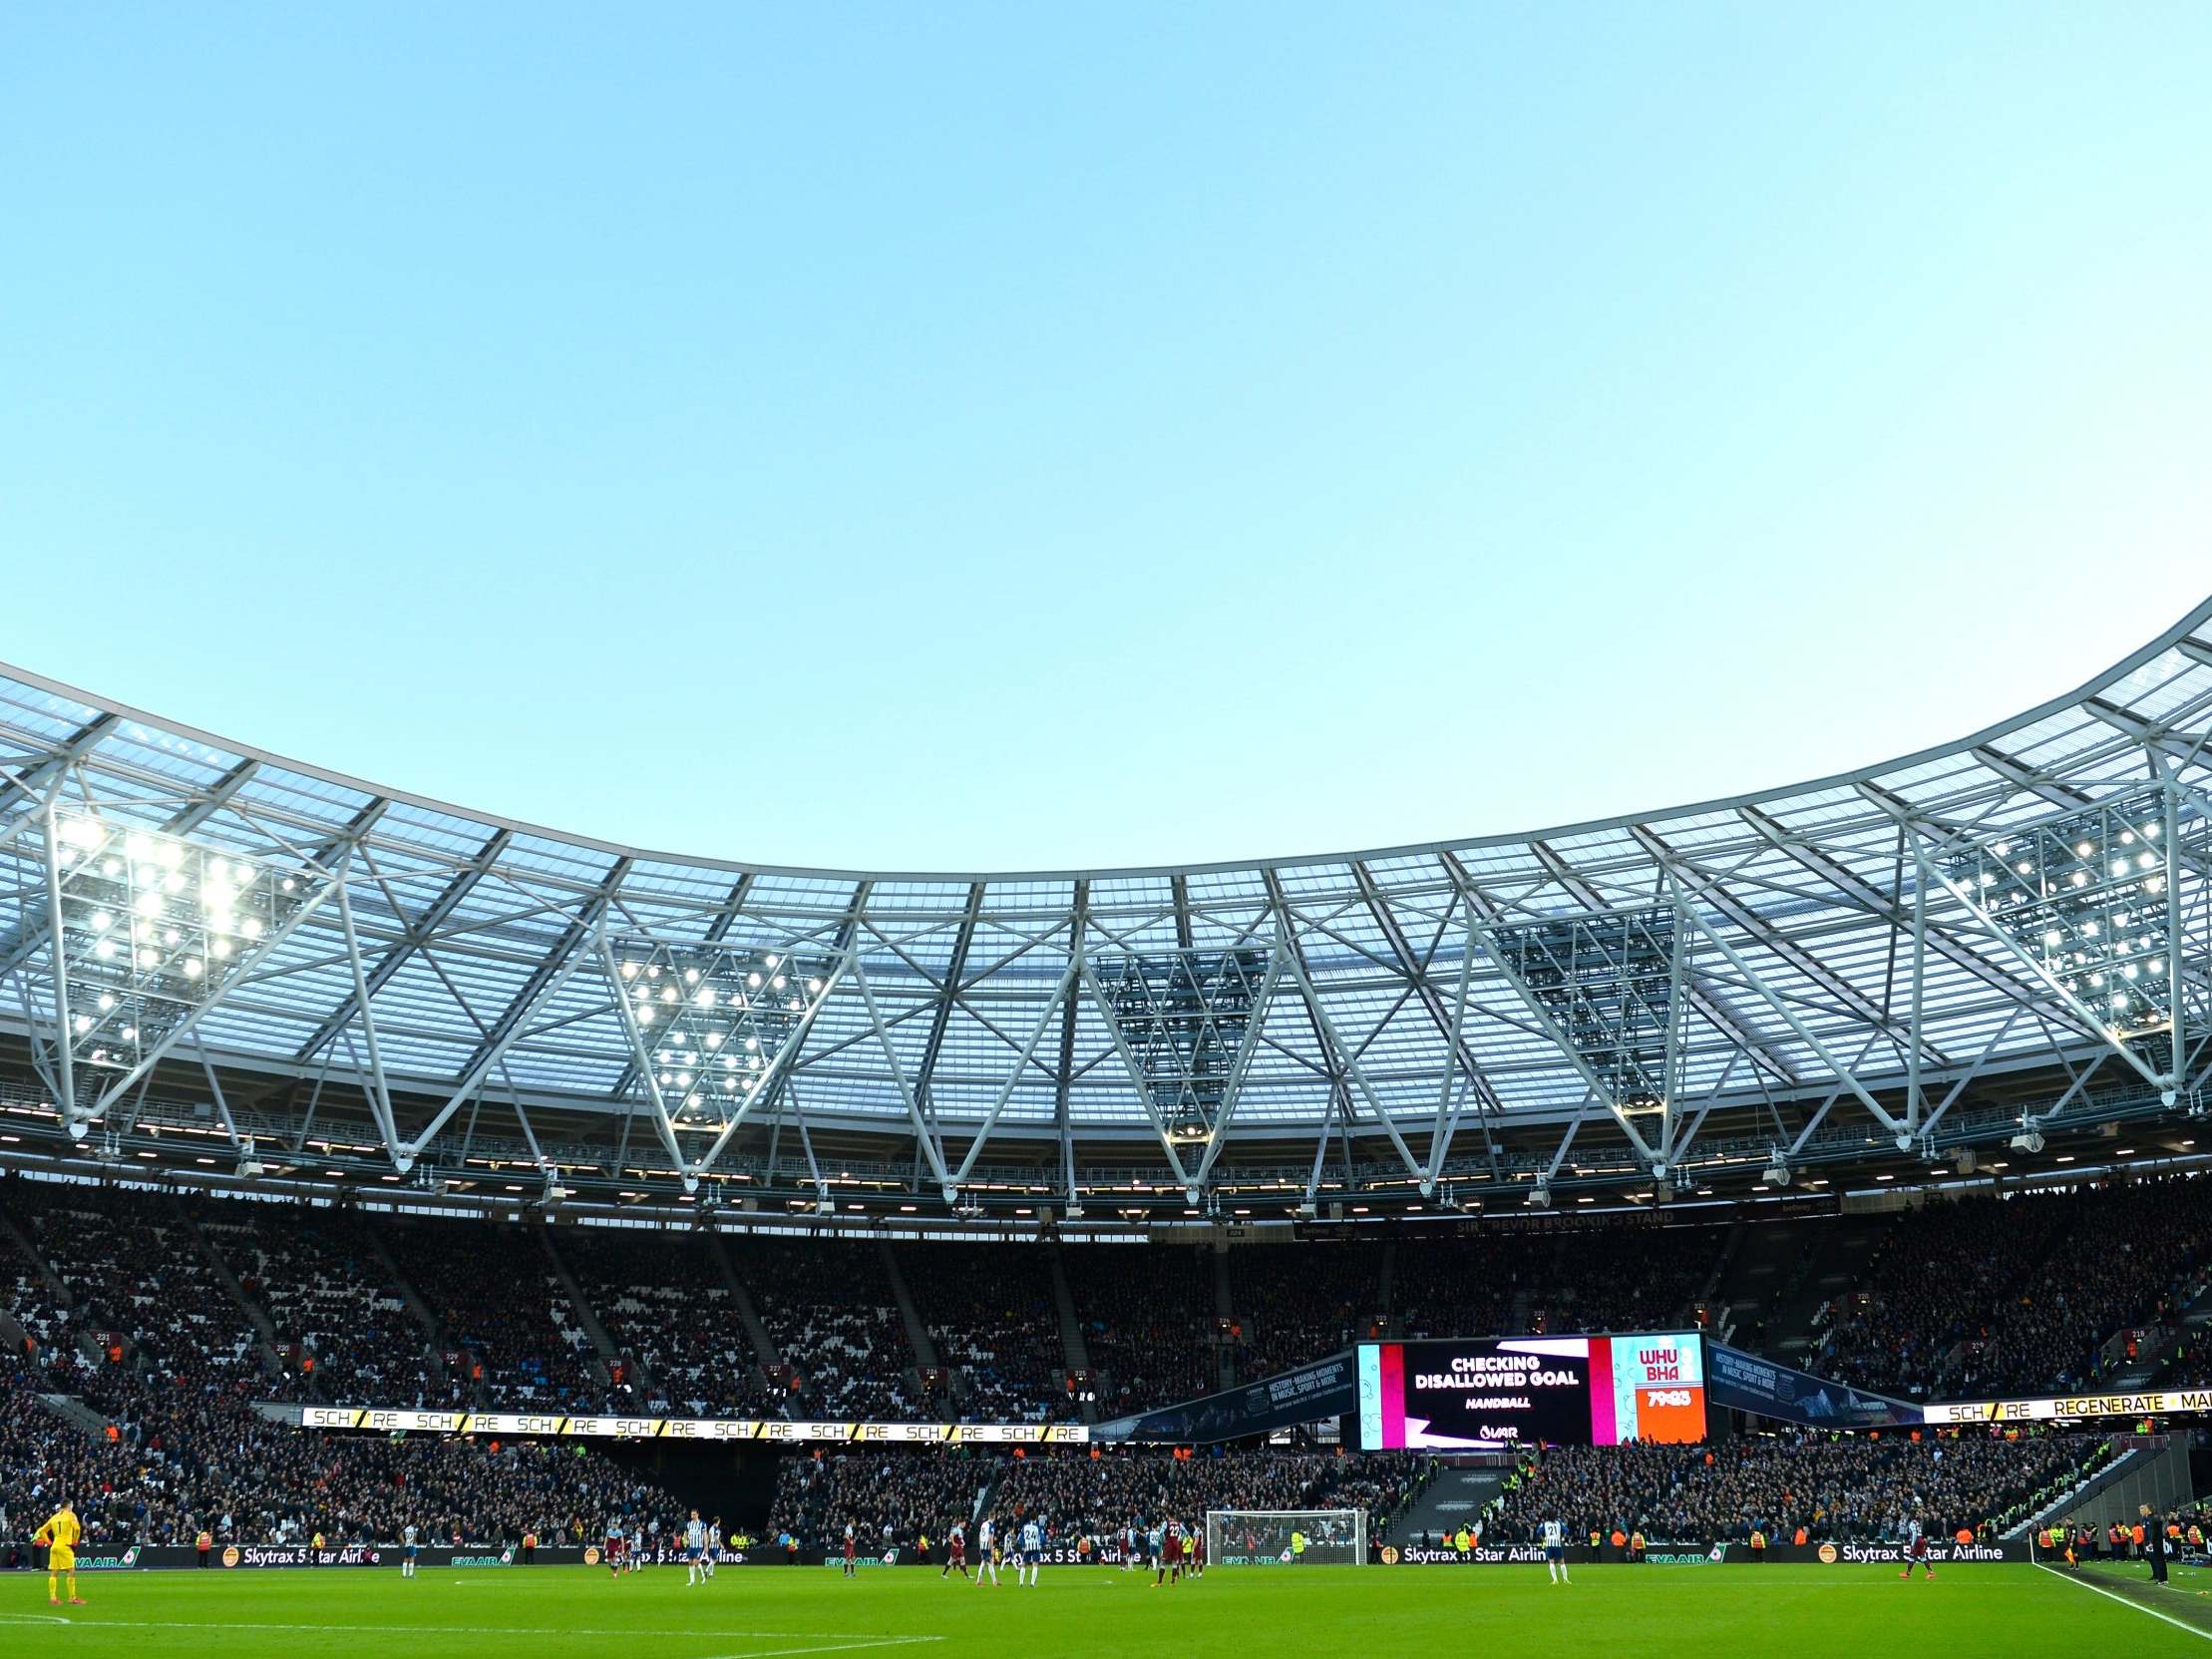 Three arrests were made at the London Stadium on Saturday